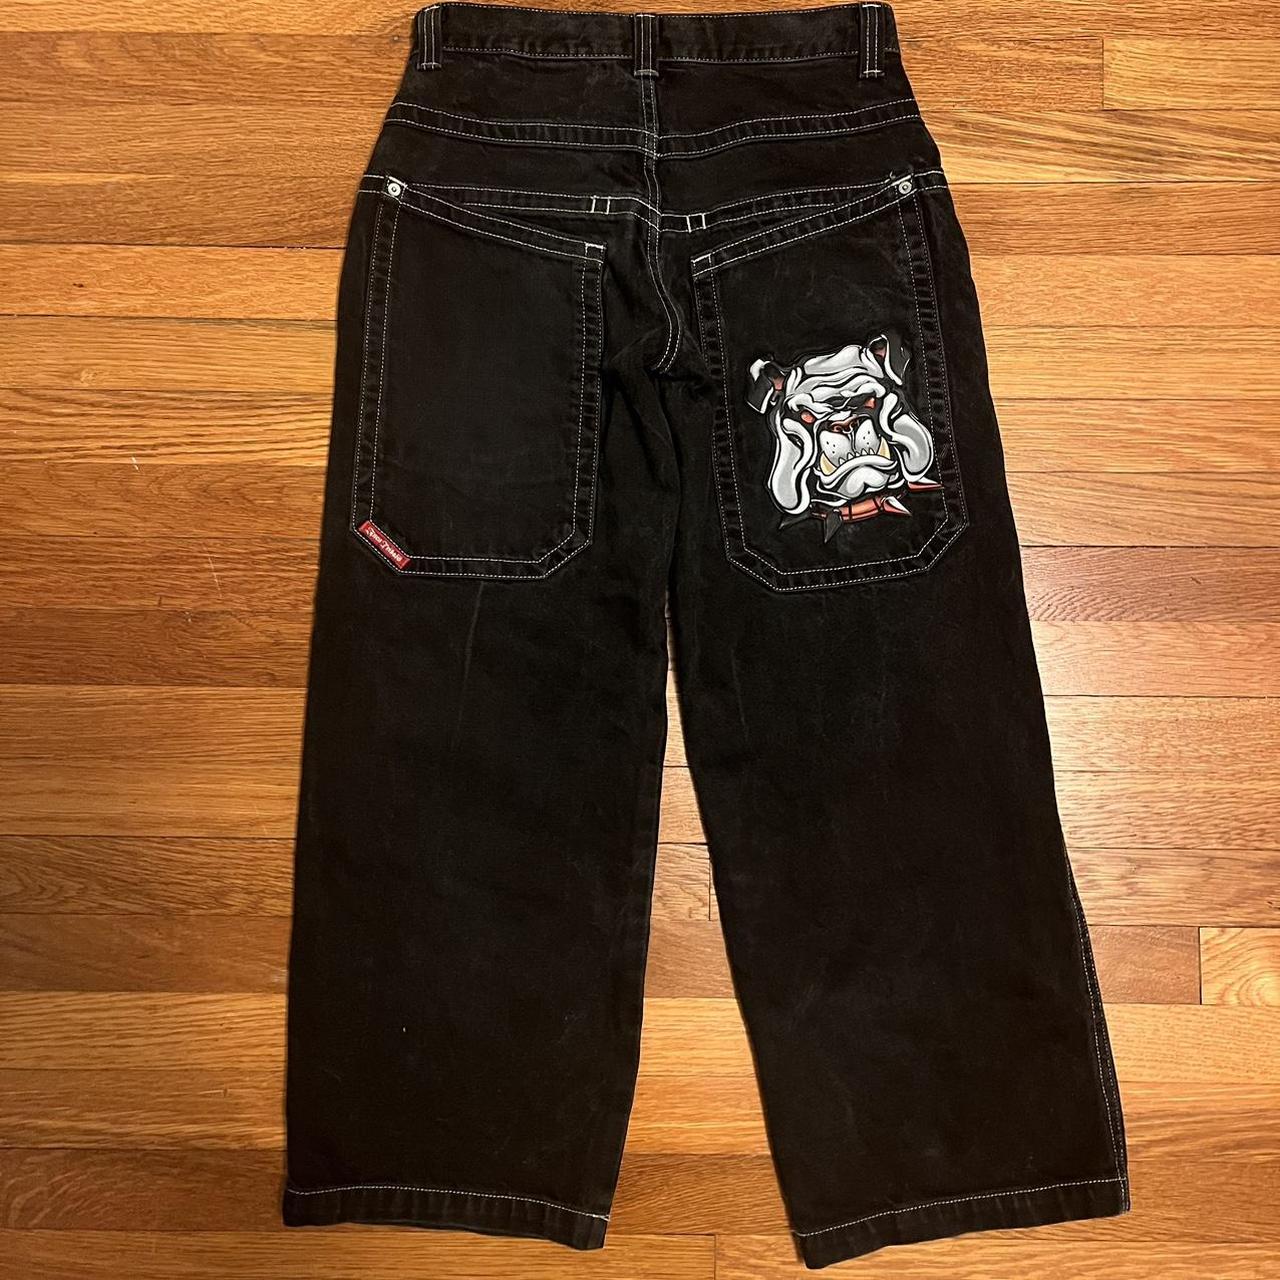 Absolute grail vintage tribal pitbull JNCOs with a... - Depop